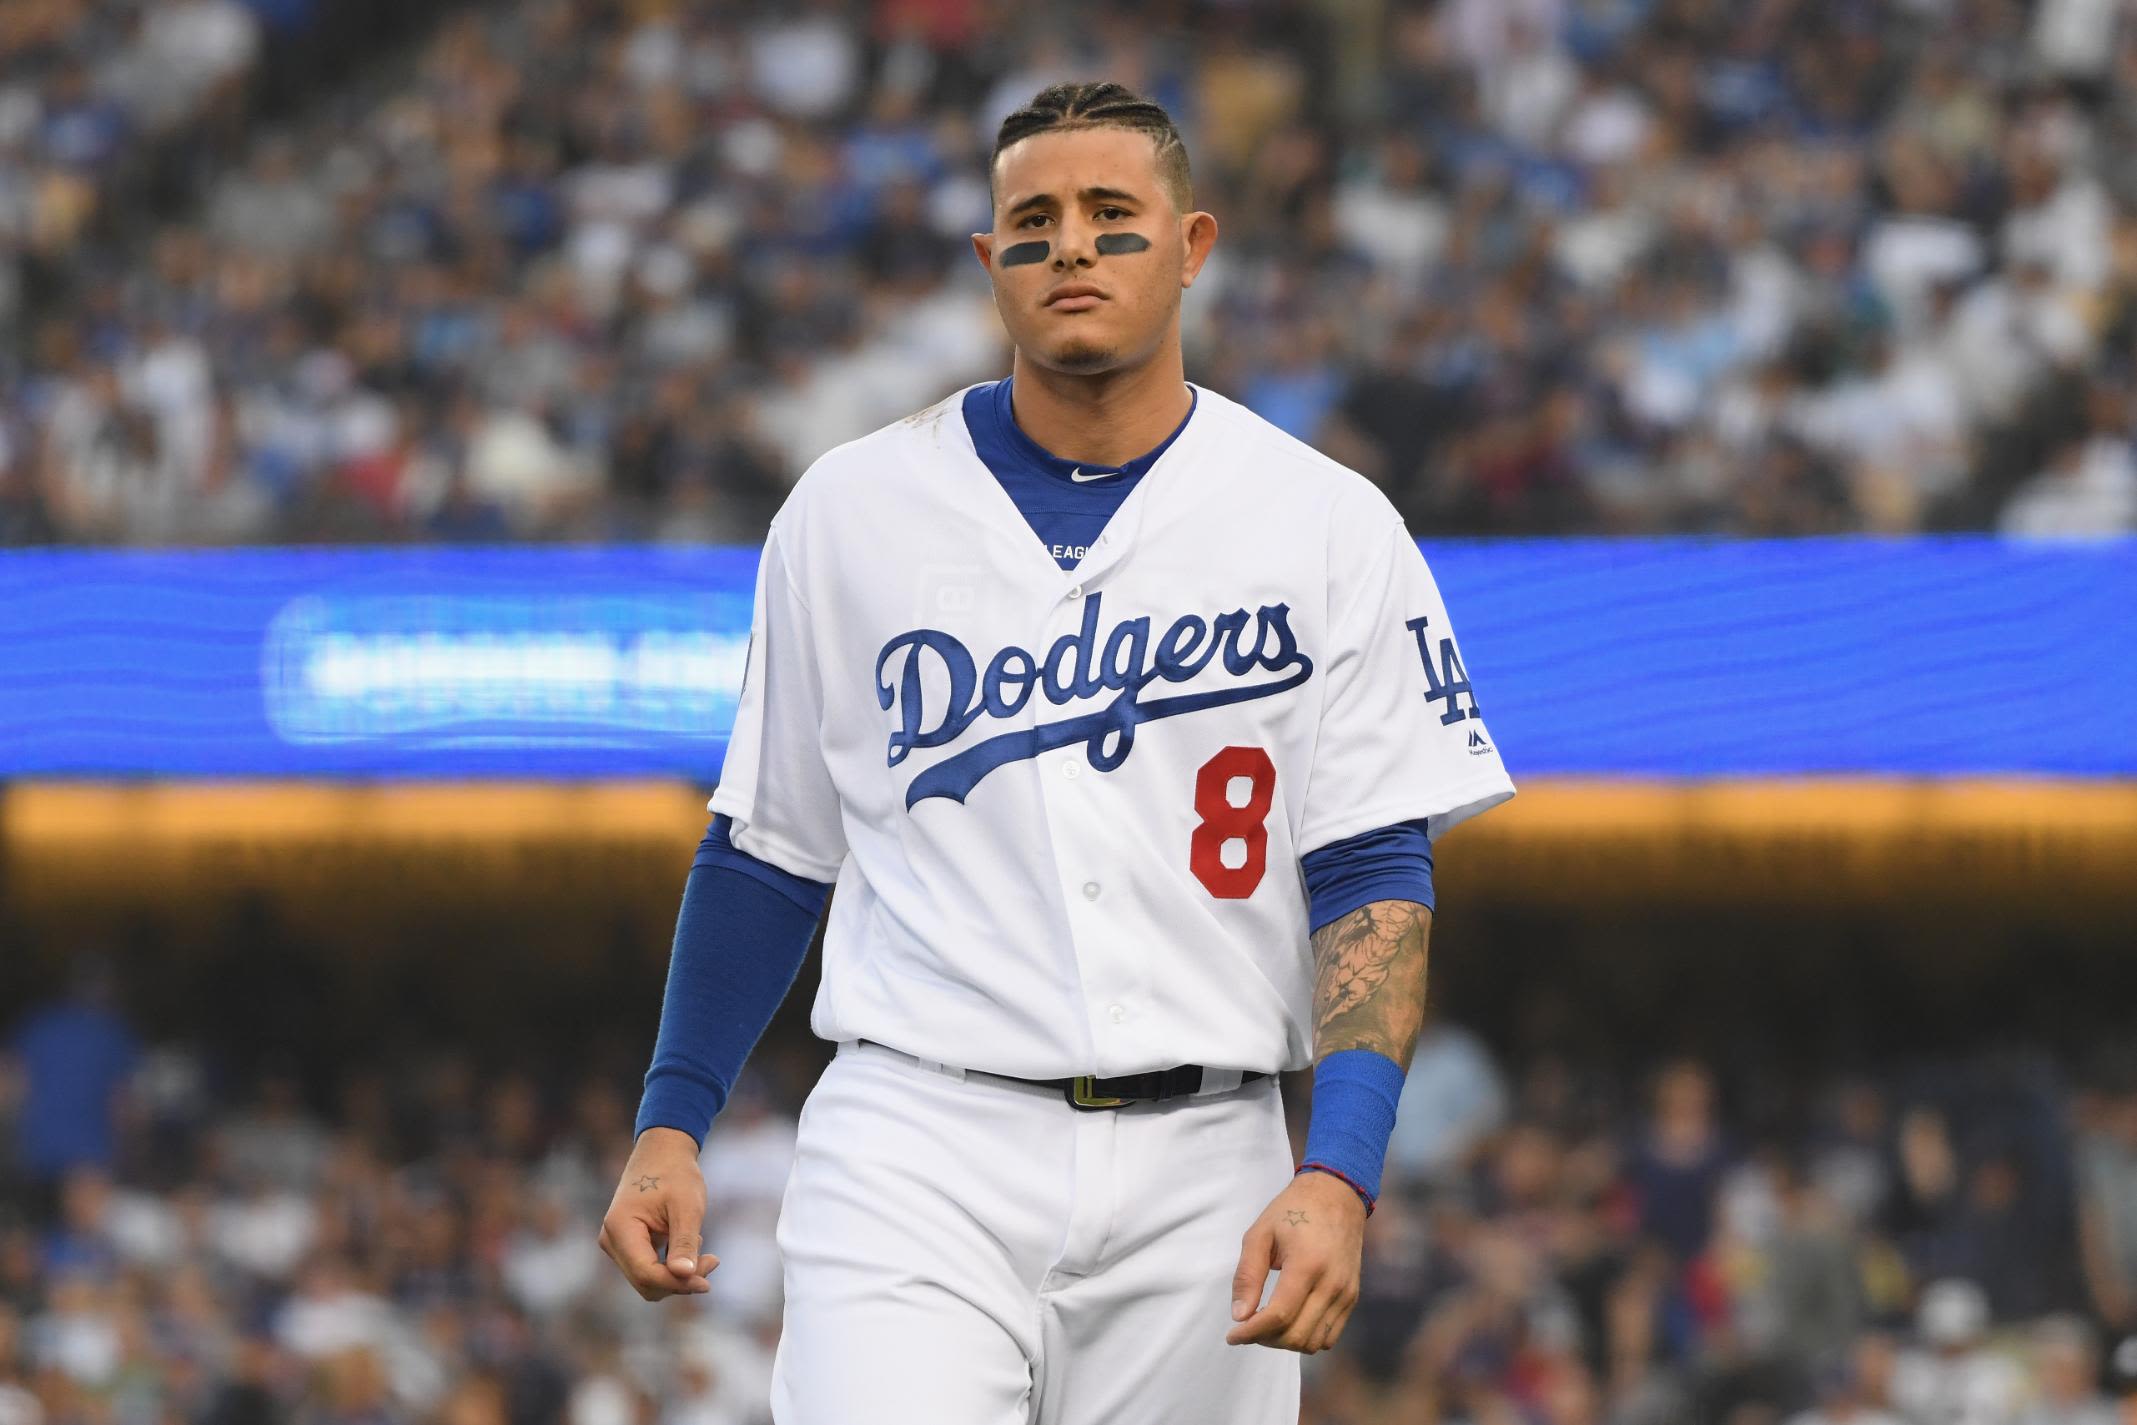 Manny Machado agrees $300m deal with San Diego Padres, accroding to reports